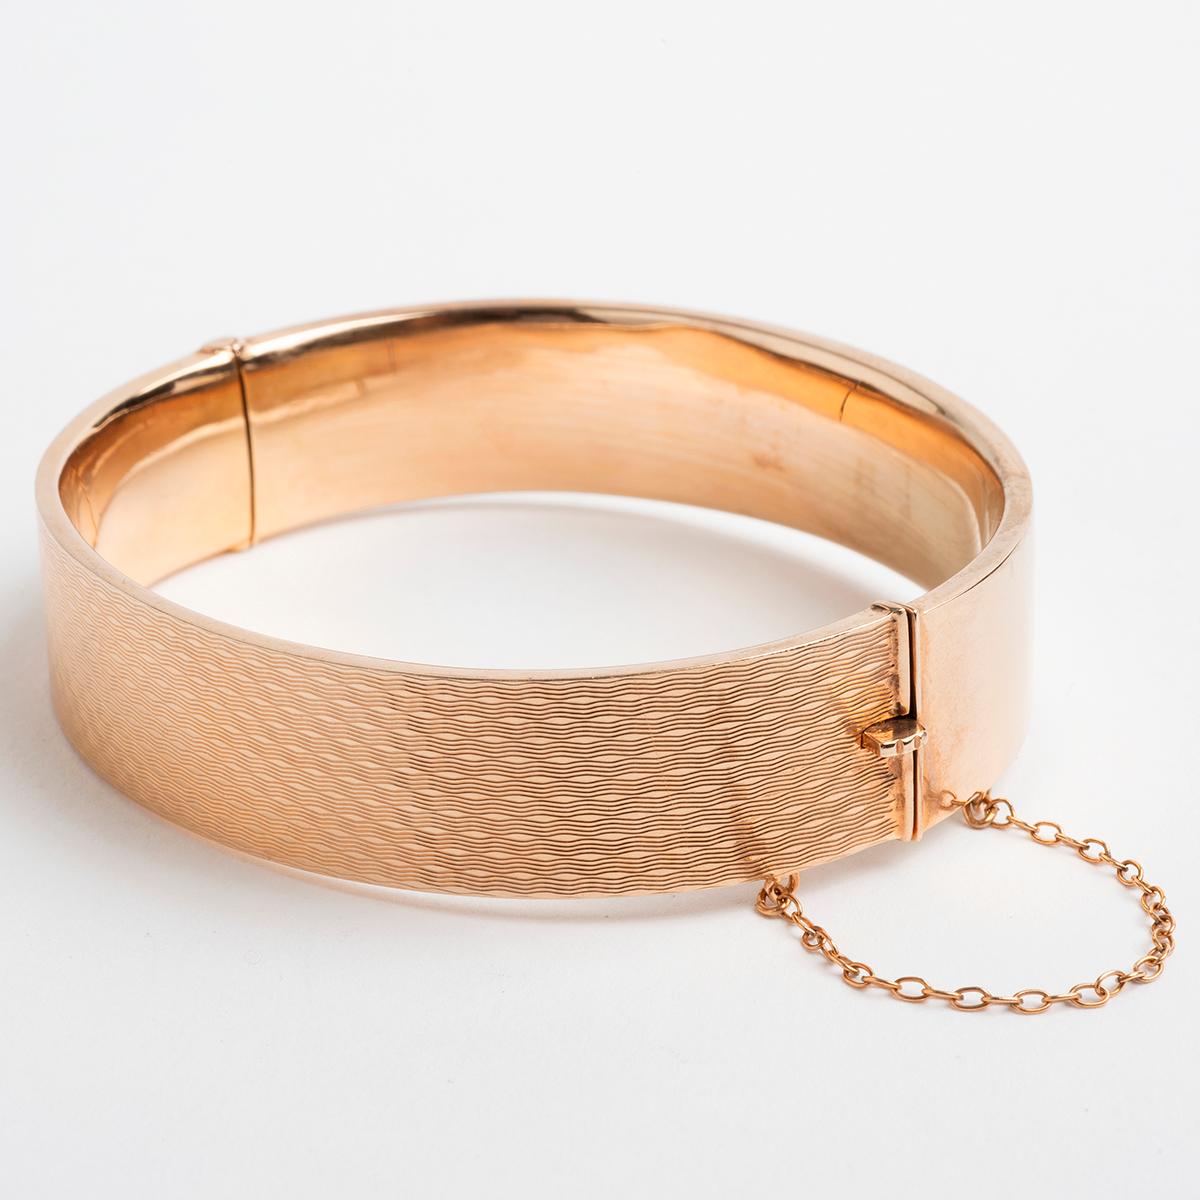 Our rare vintage 9k rose gold wide hinged hollow bangle features a beautiful chequered design, and is secured by a box and tongue clasp with safety chain. Hallmarked Birmingham, U.K., 1939 and SB&S Ltd. The diameter is 5.8cm, weight 13.9g. A pretty